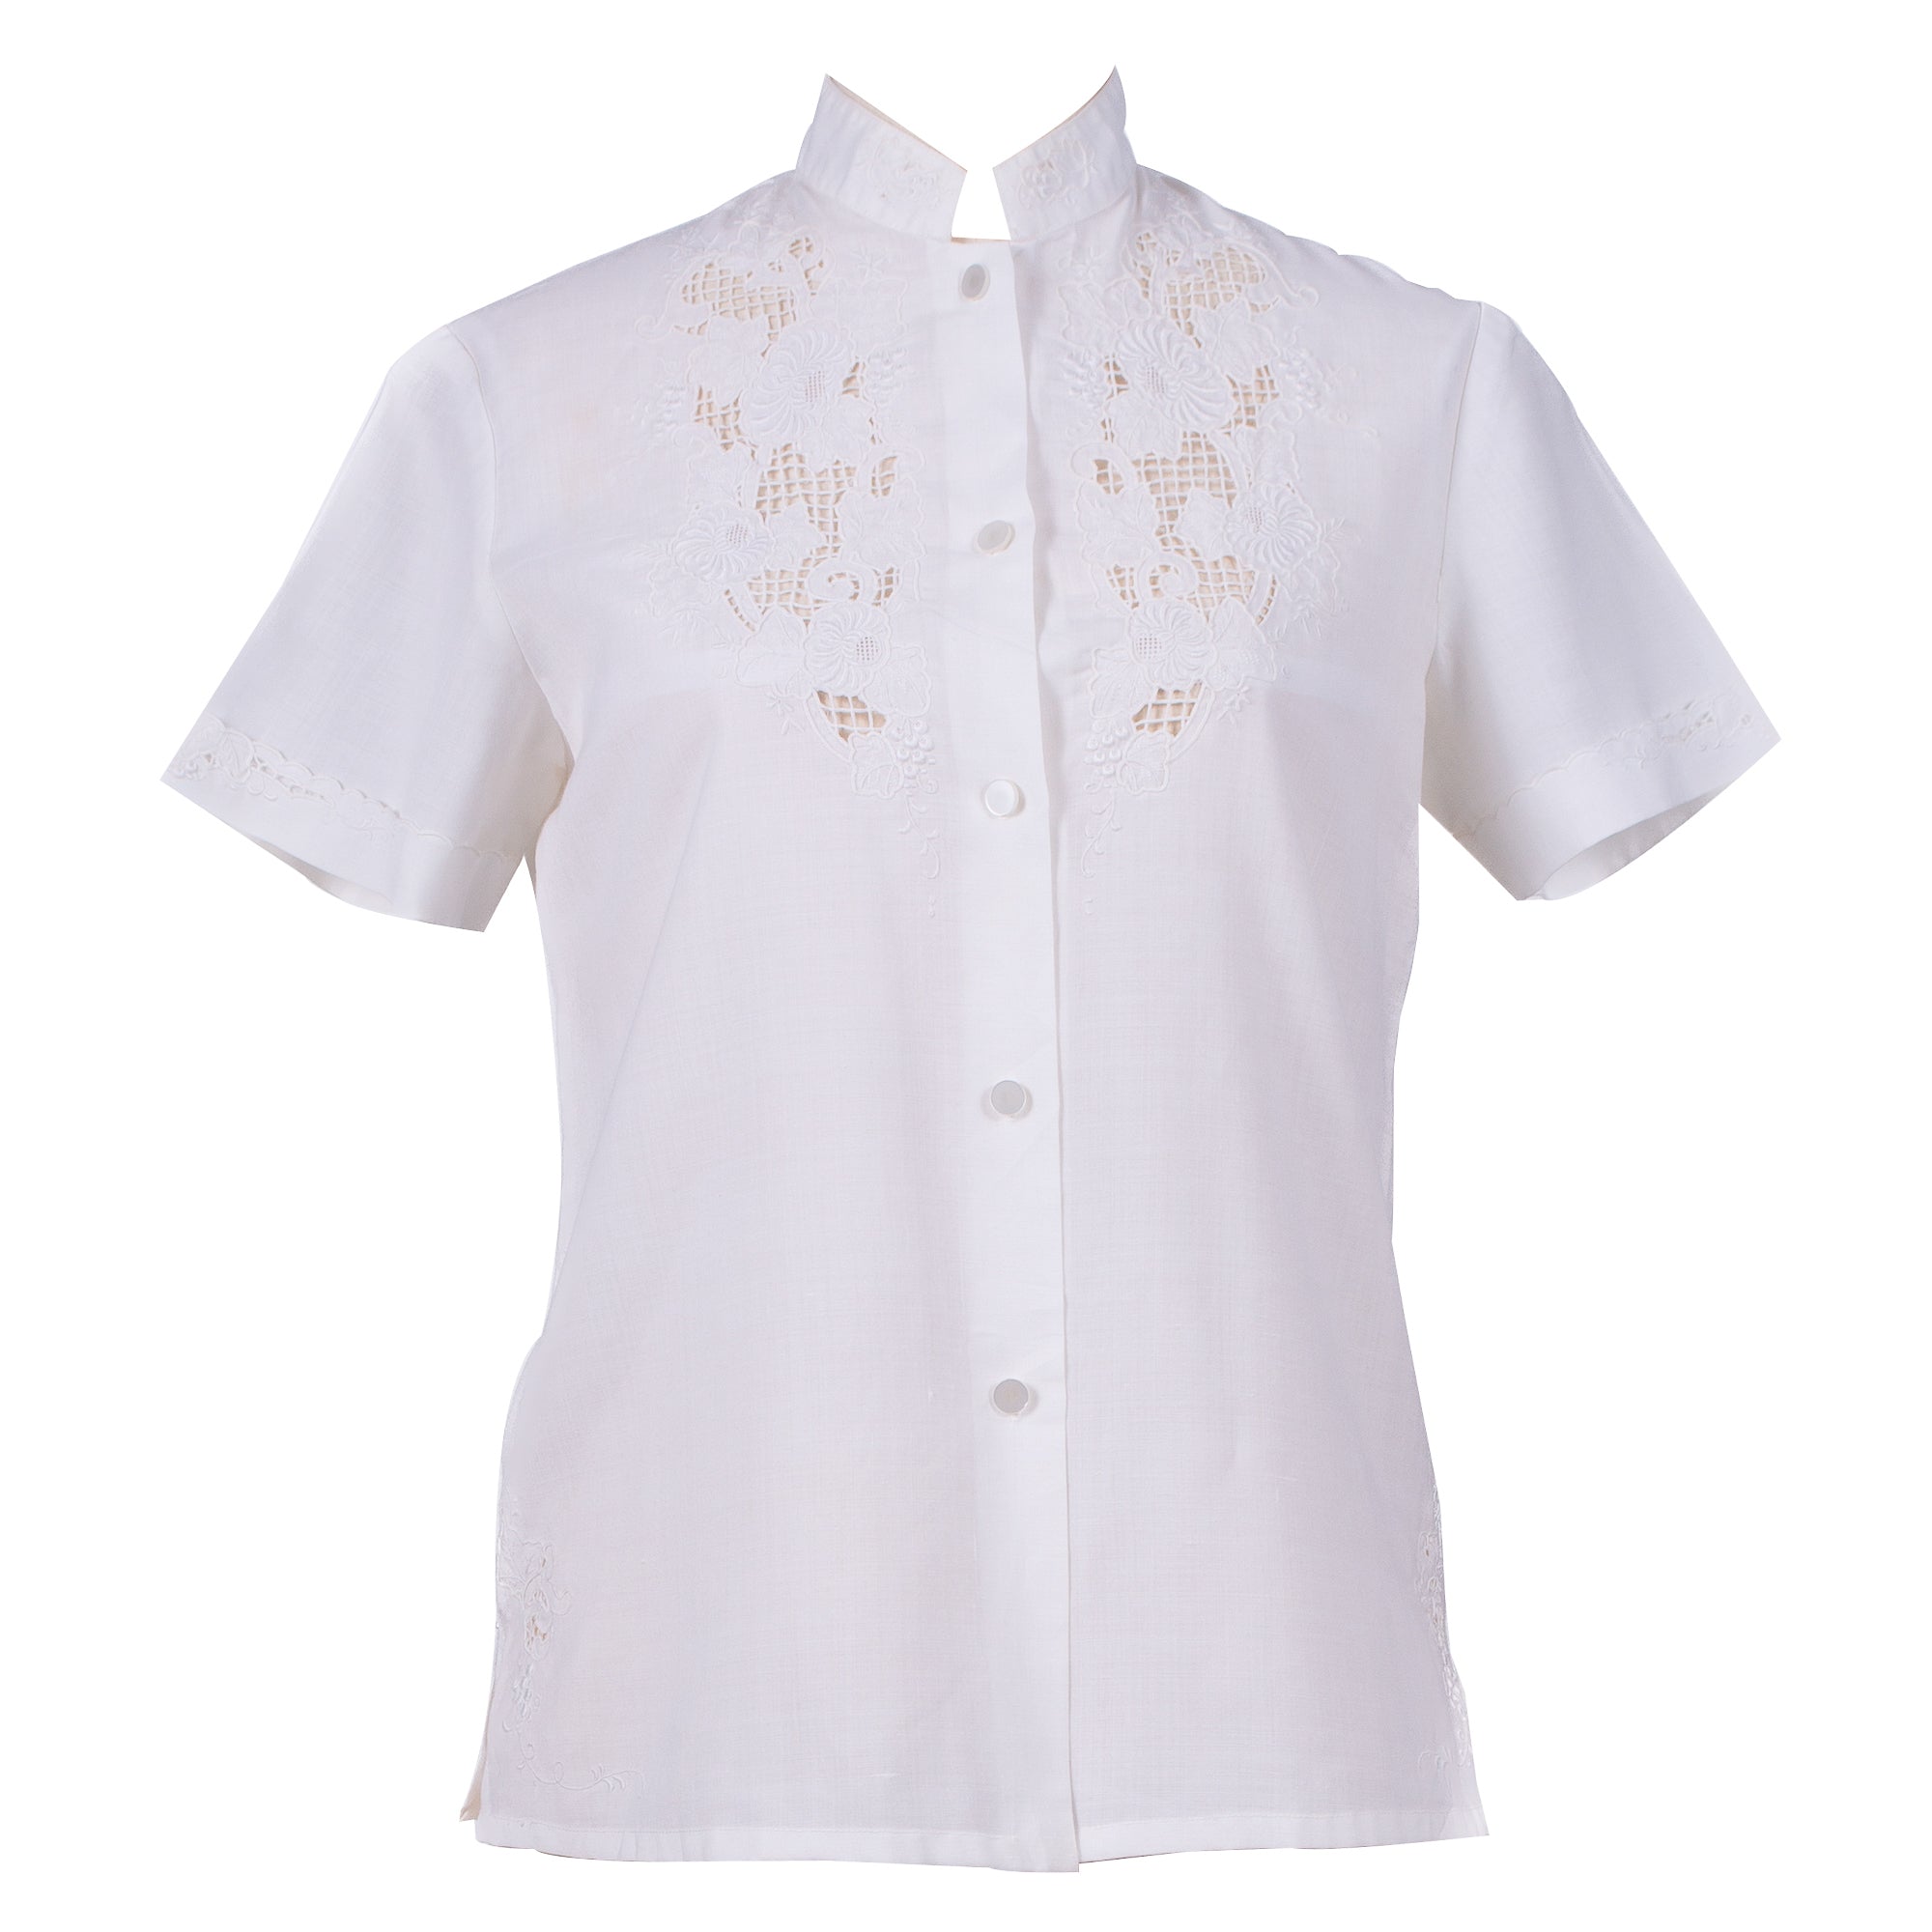 Women’s Embroidered Vintage White Cotton Blouse With Mandarin Collar Small Sugar Cream Vintage